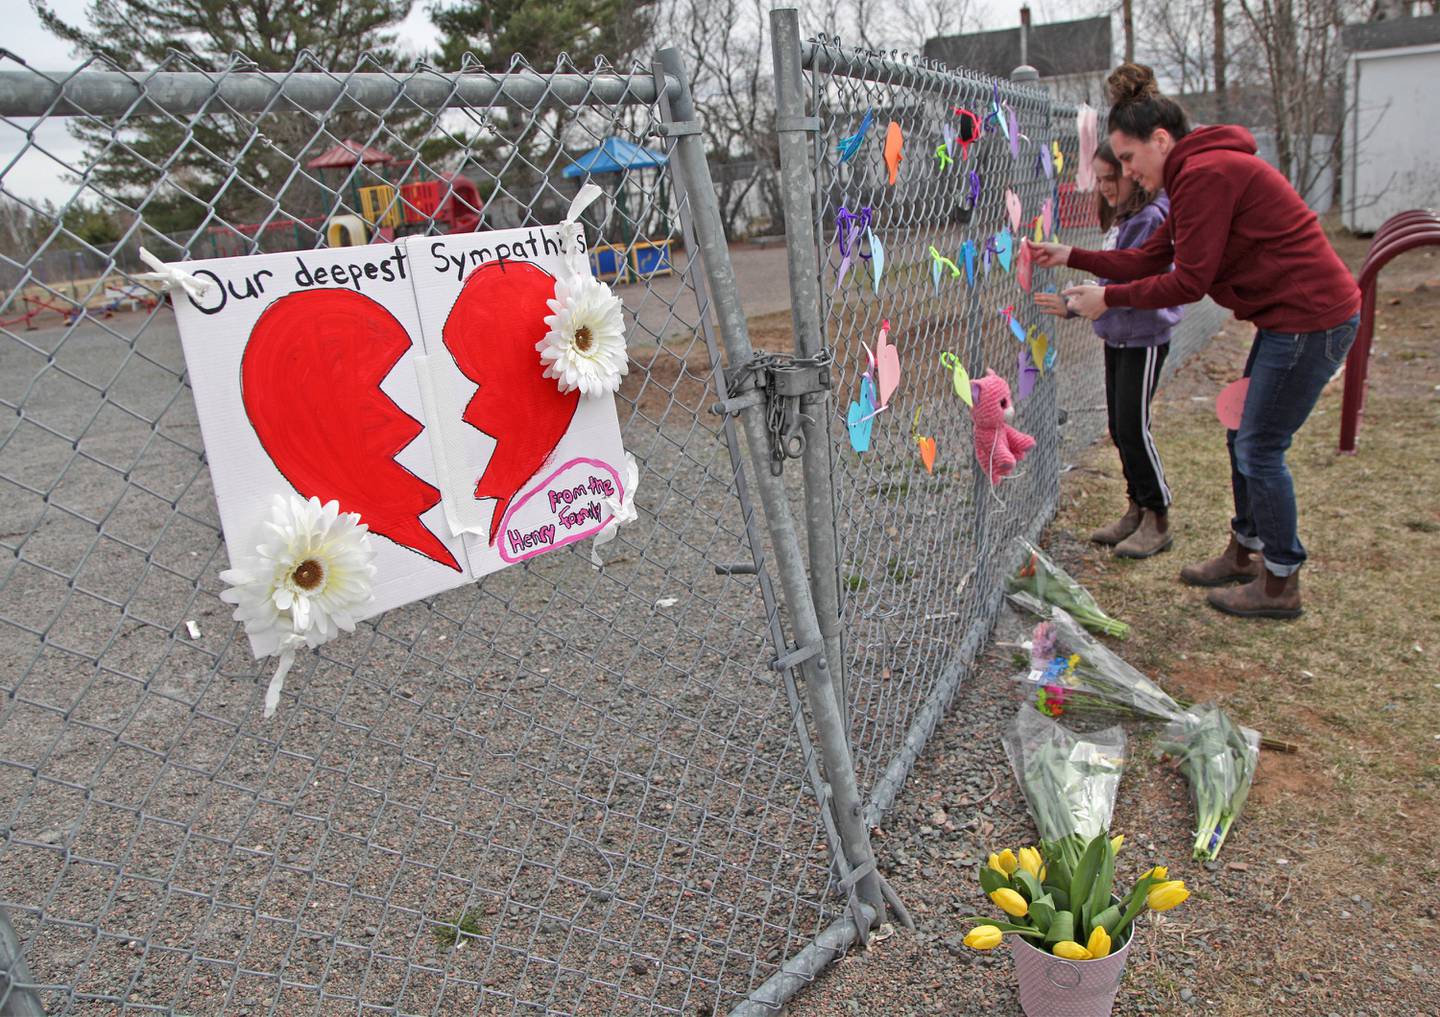  A woman and her daughter place a heart on a fence at a growing memorial in front of the Debert School in Debert, Nova Scotia, after Lisa McCully, a teacher at the school, was killed in a mass shooting.